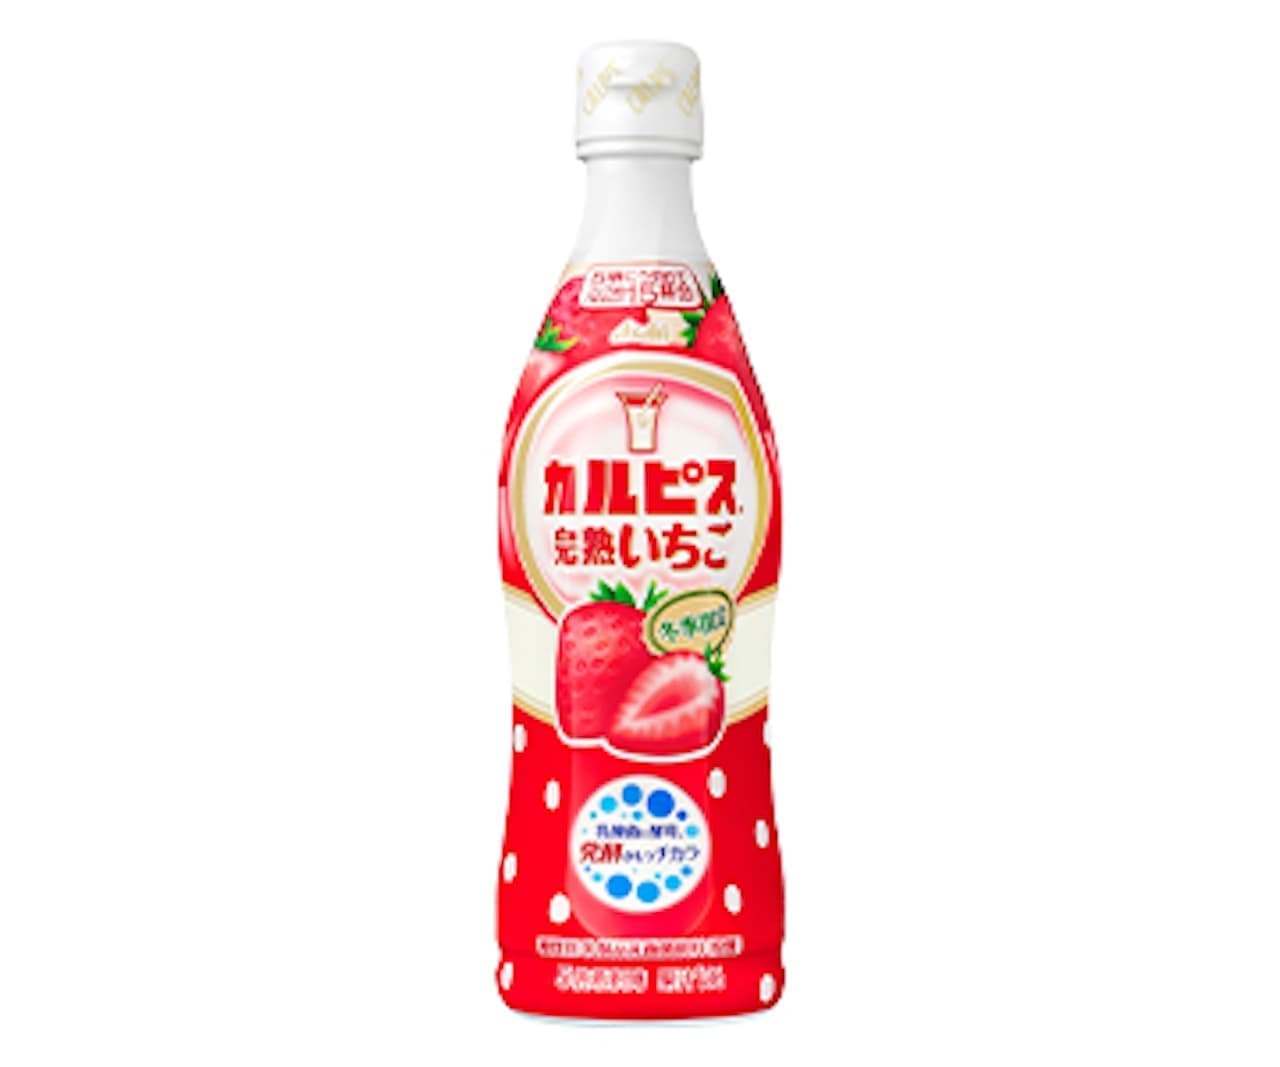 "" Calpis "ripe strawberry" for a limited time